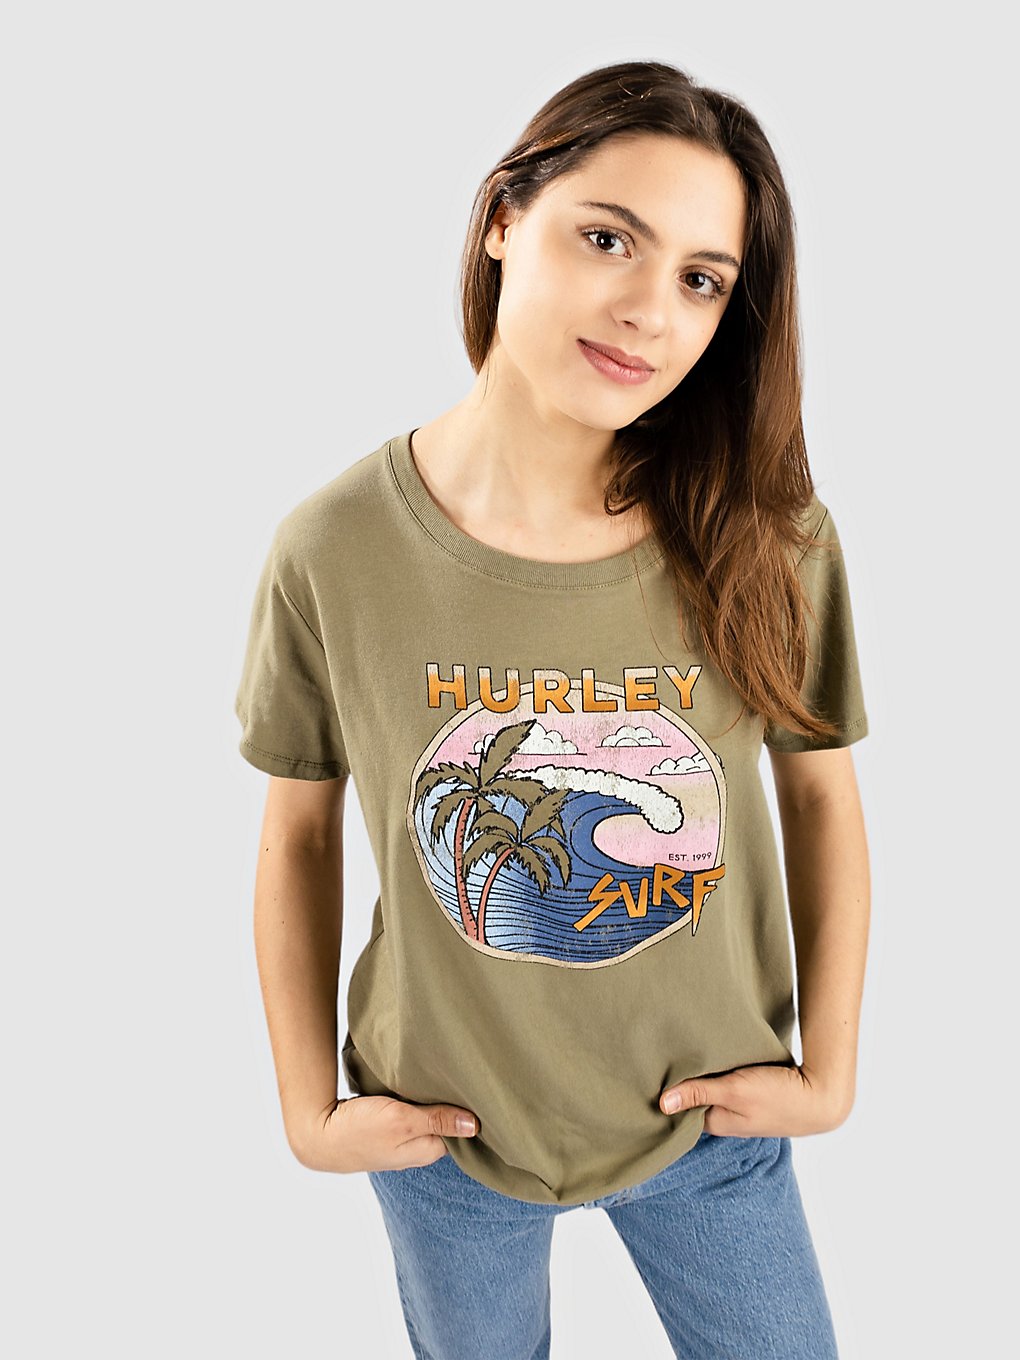 Hurley Surf Classic T-Shirt taupe kaufen